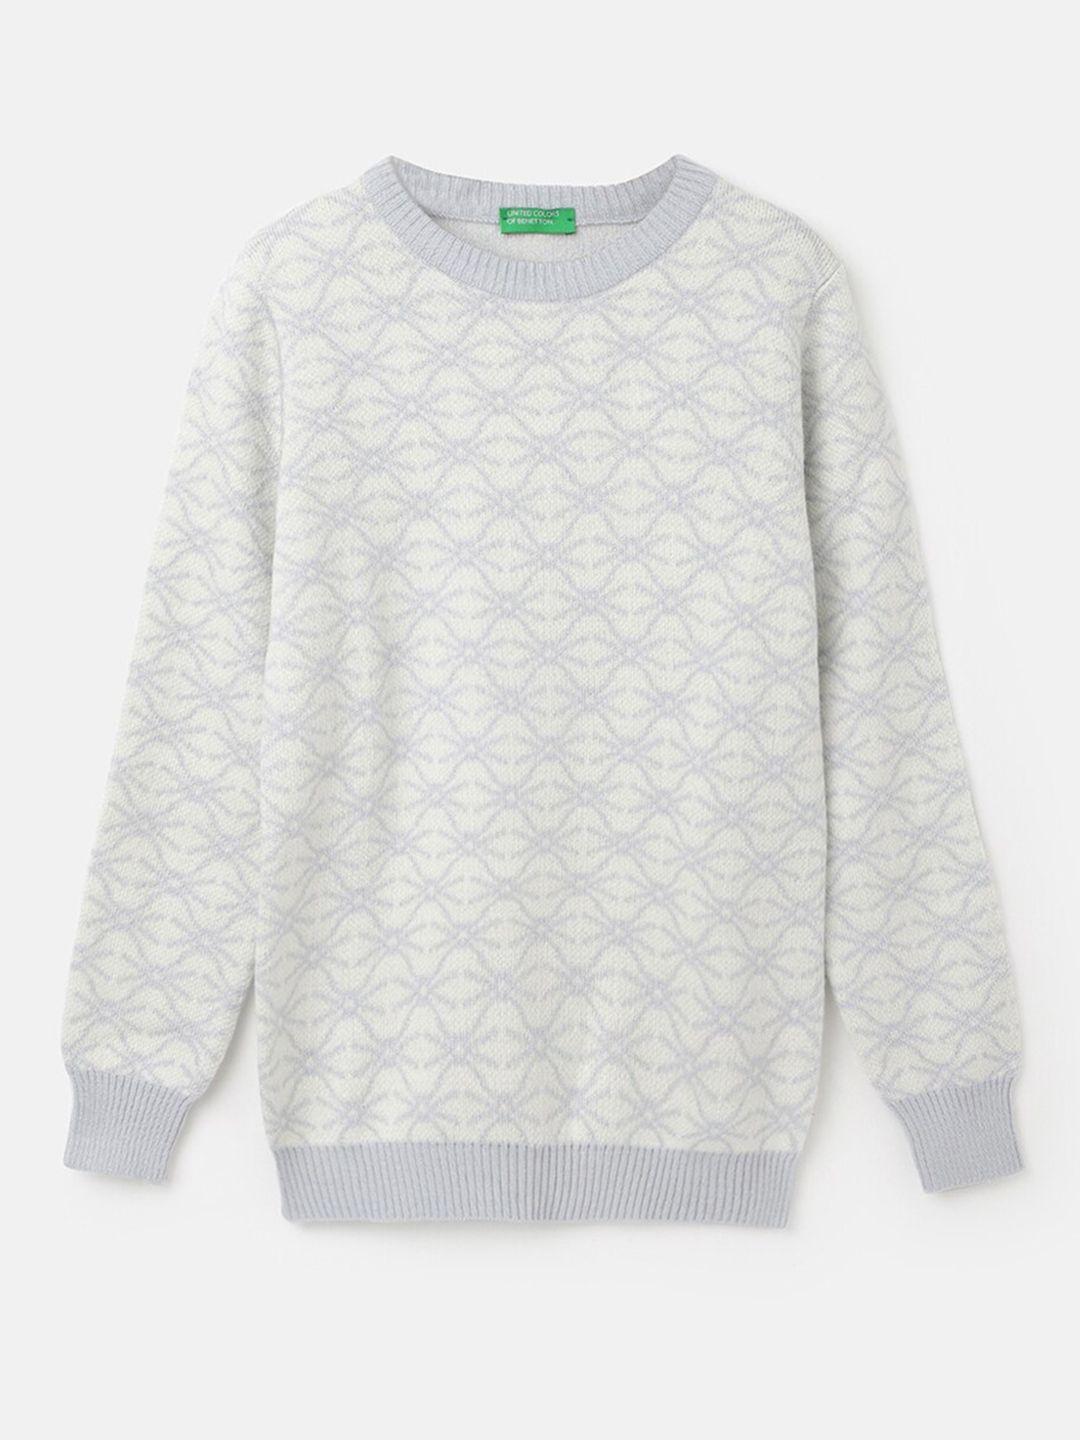 united colors of benetton boys round neck printed pullover